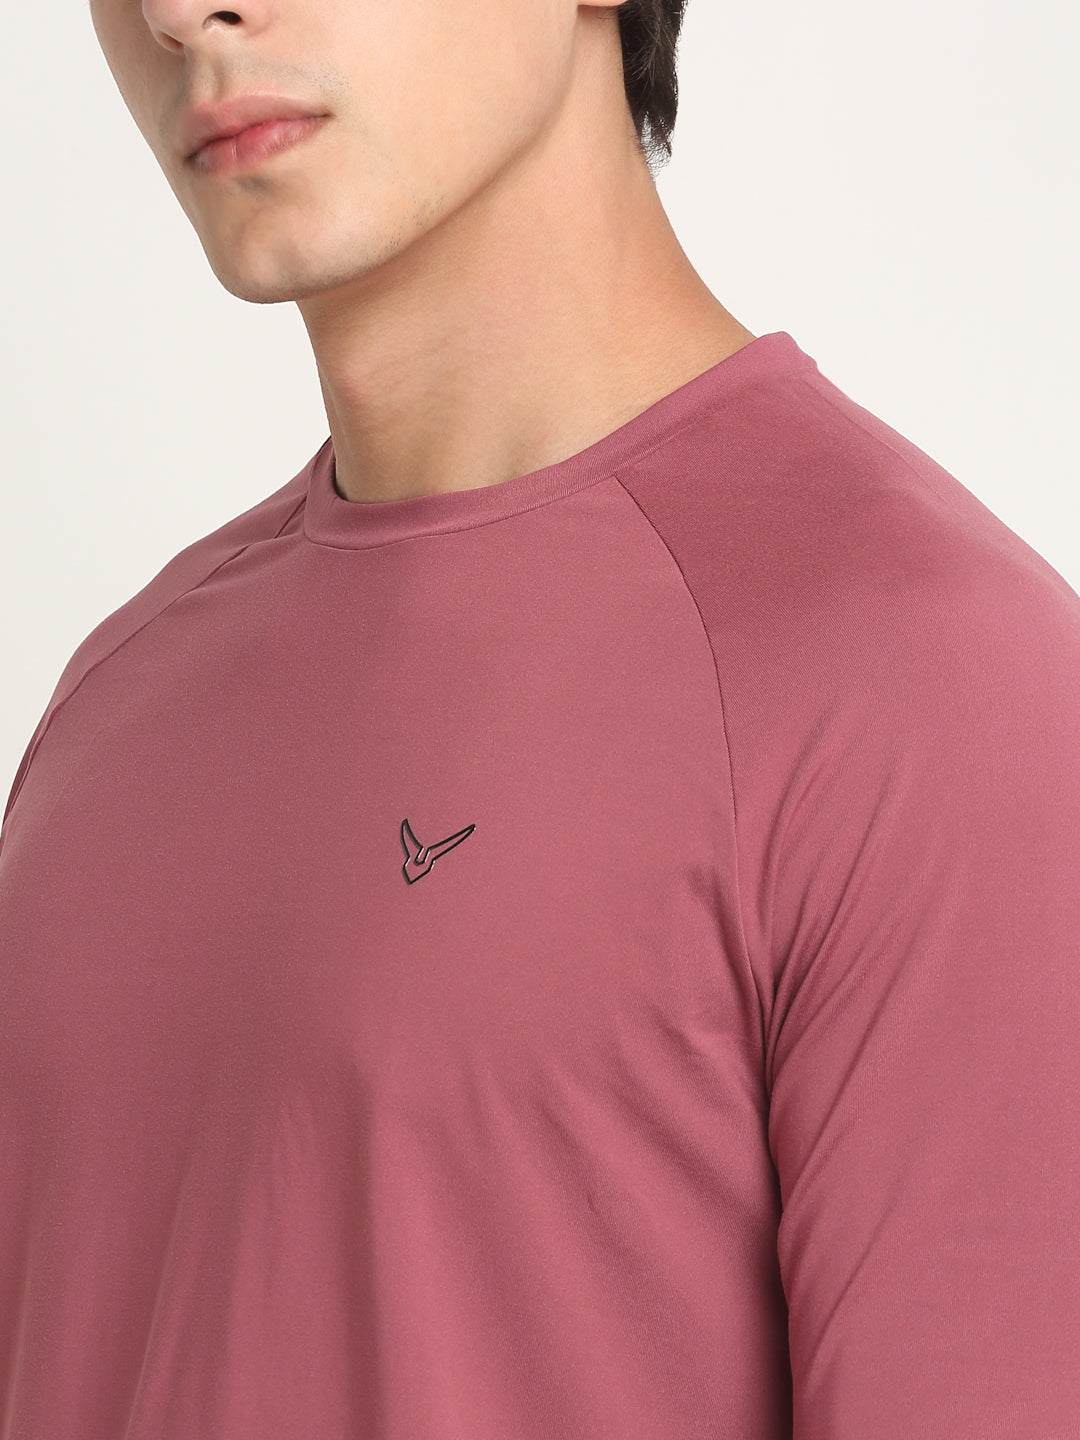 Invincible Men's Stretch Full Sleeve Tee